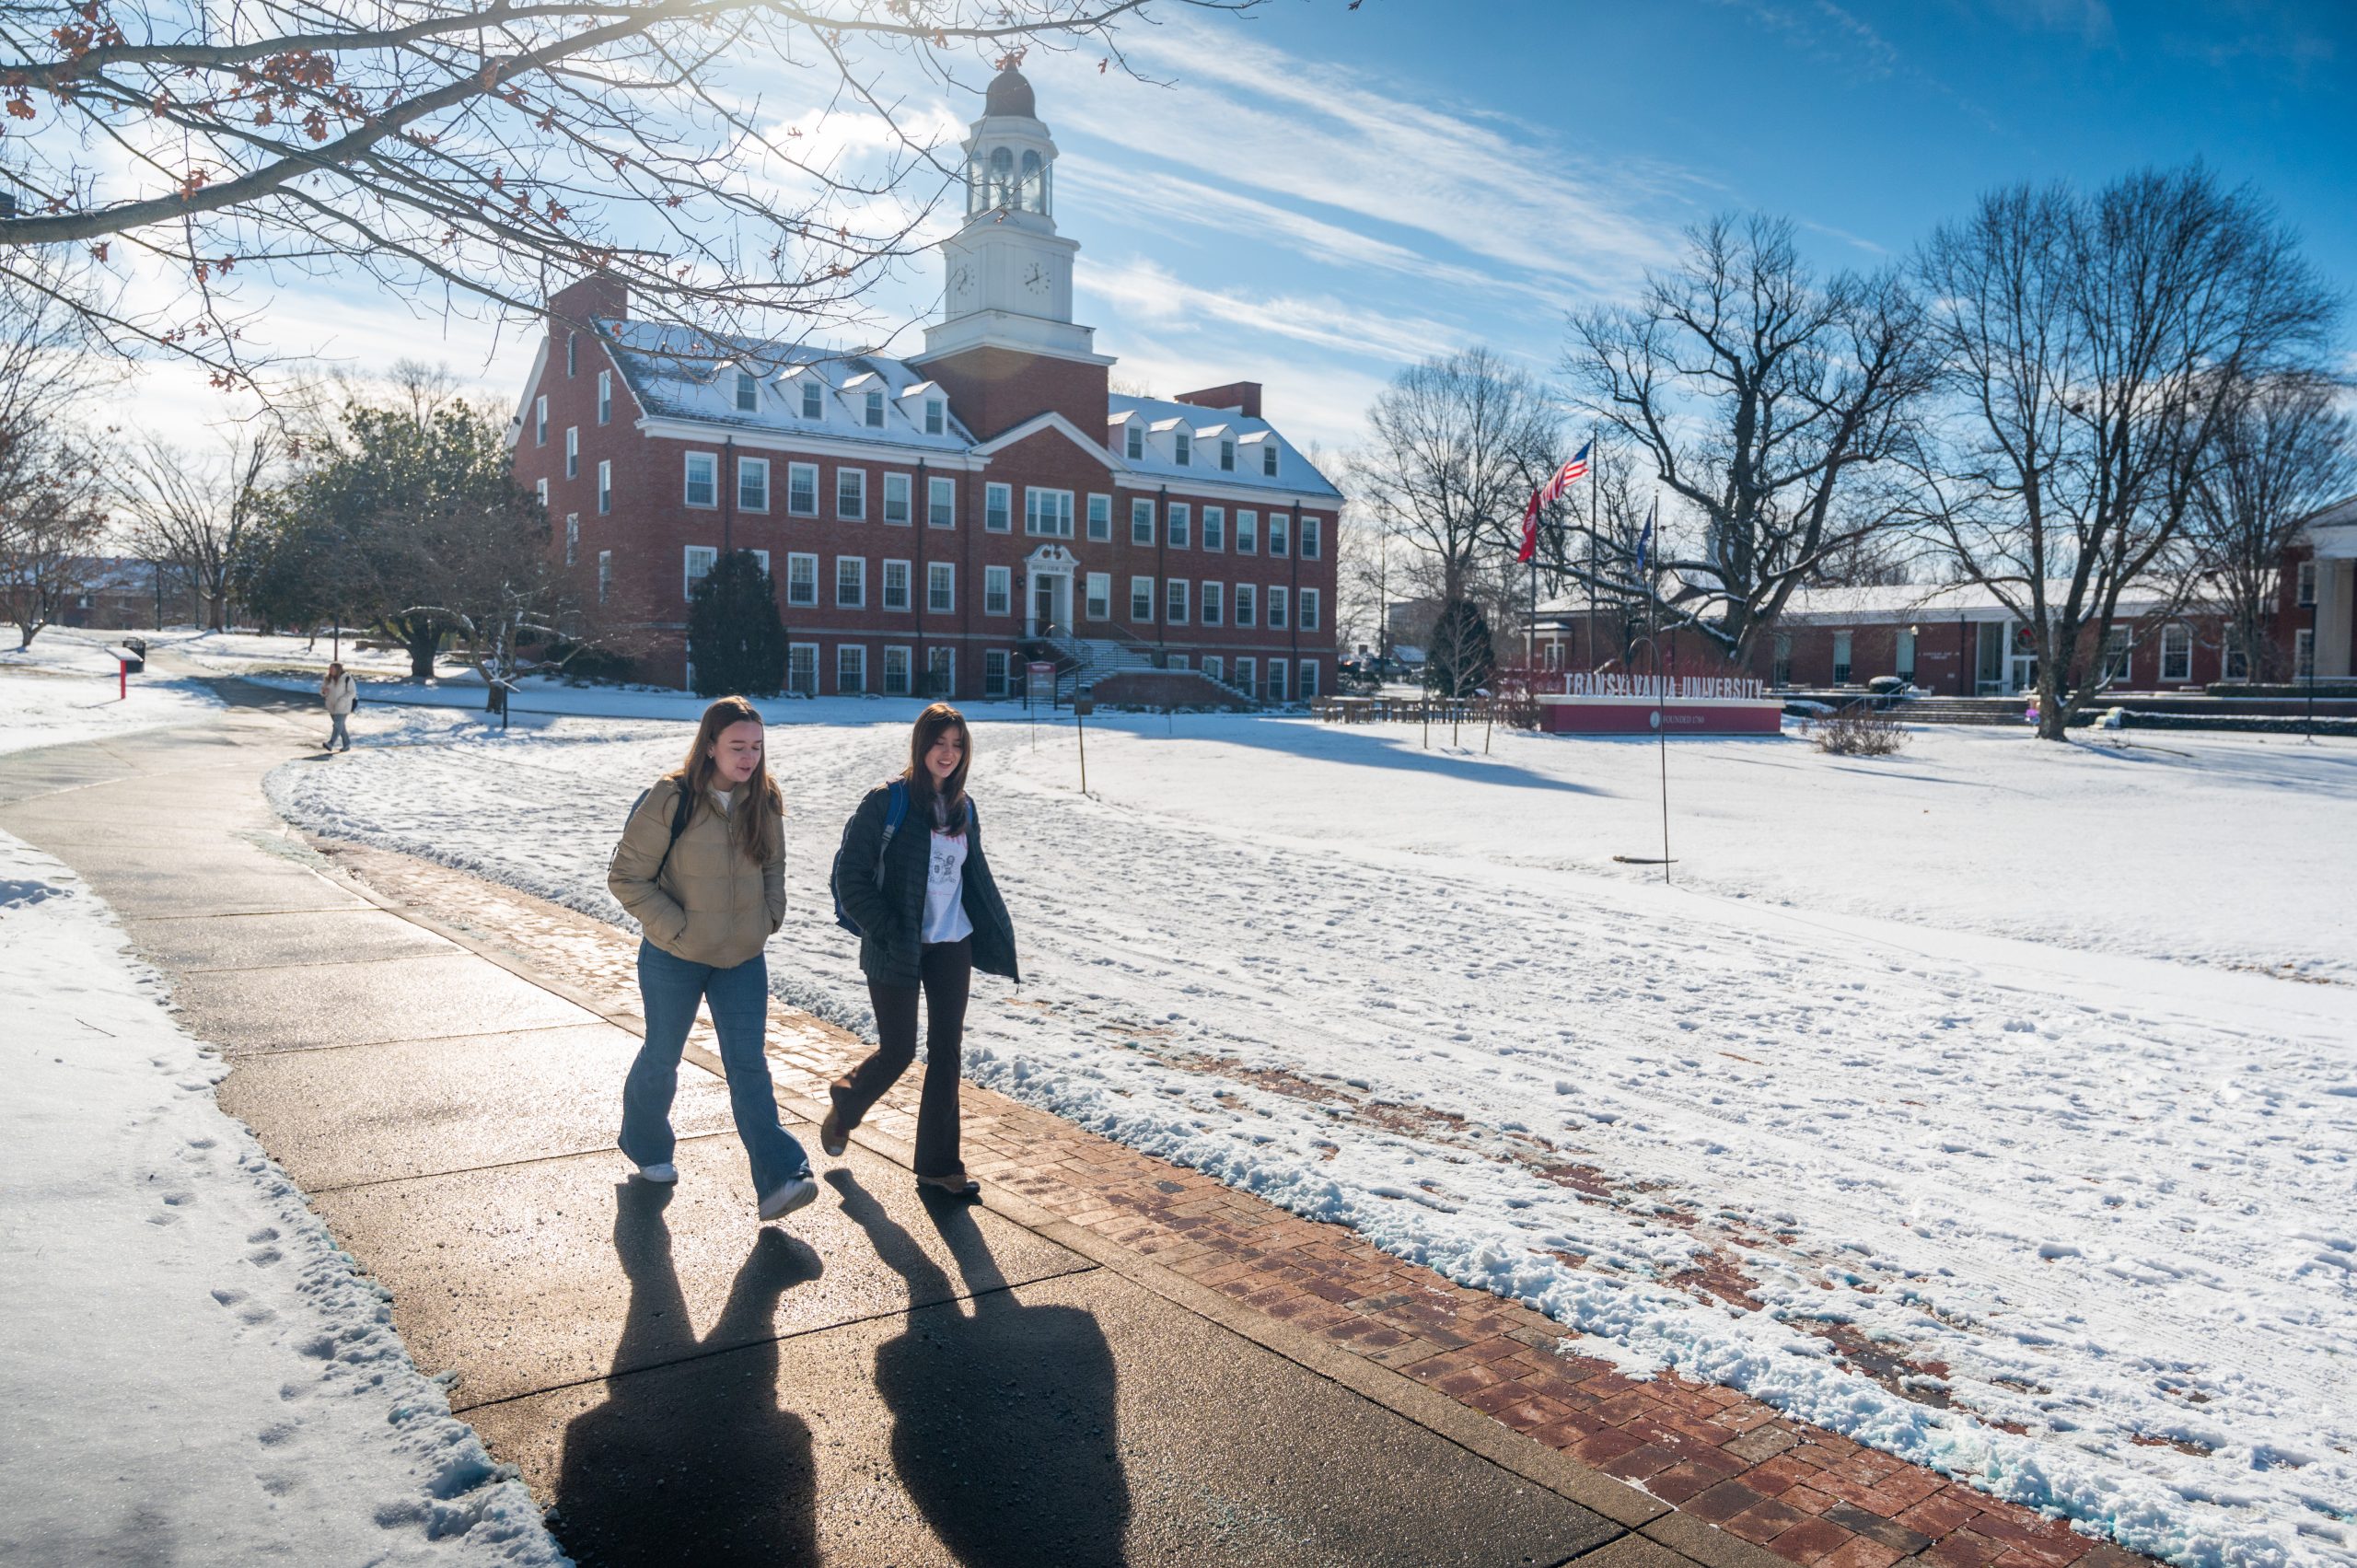 Students walking on campus on a snowy day.